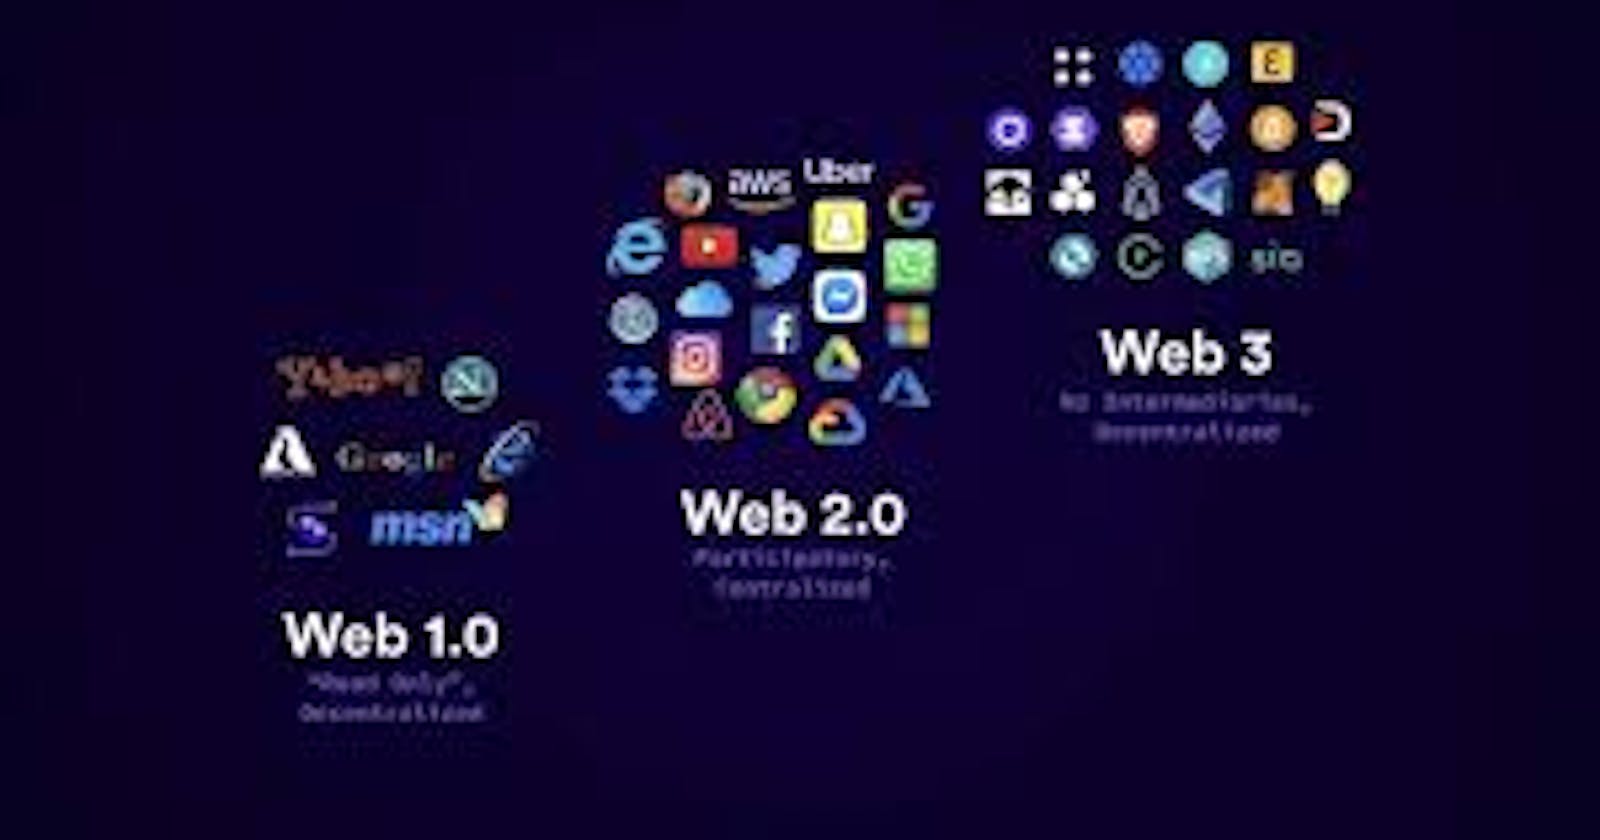 What's next after  web 3.0?